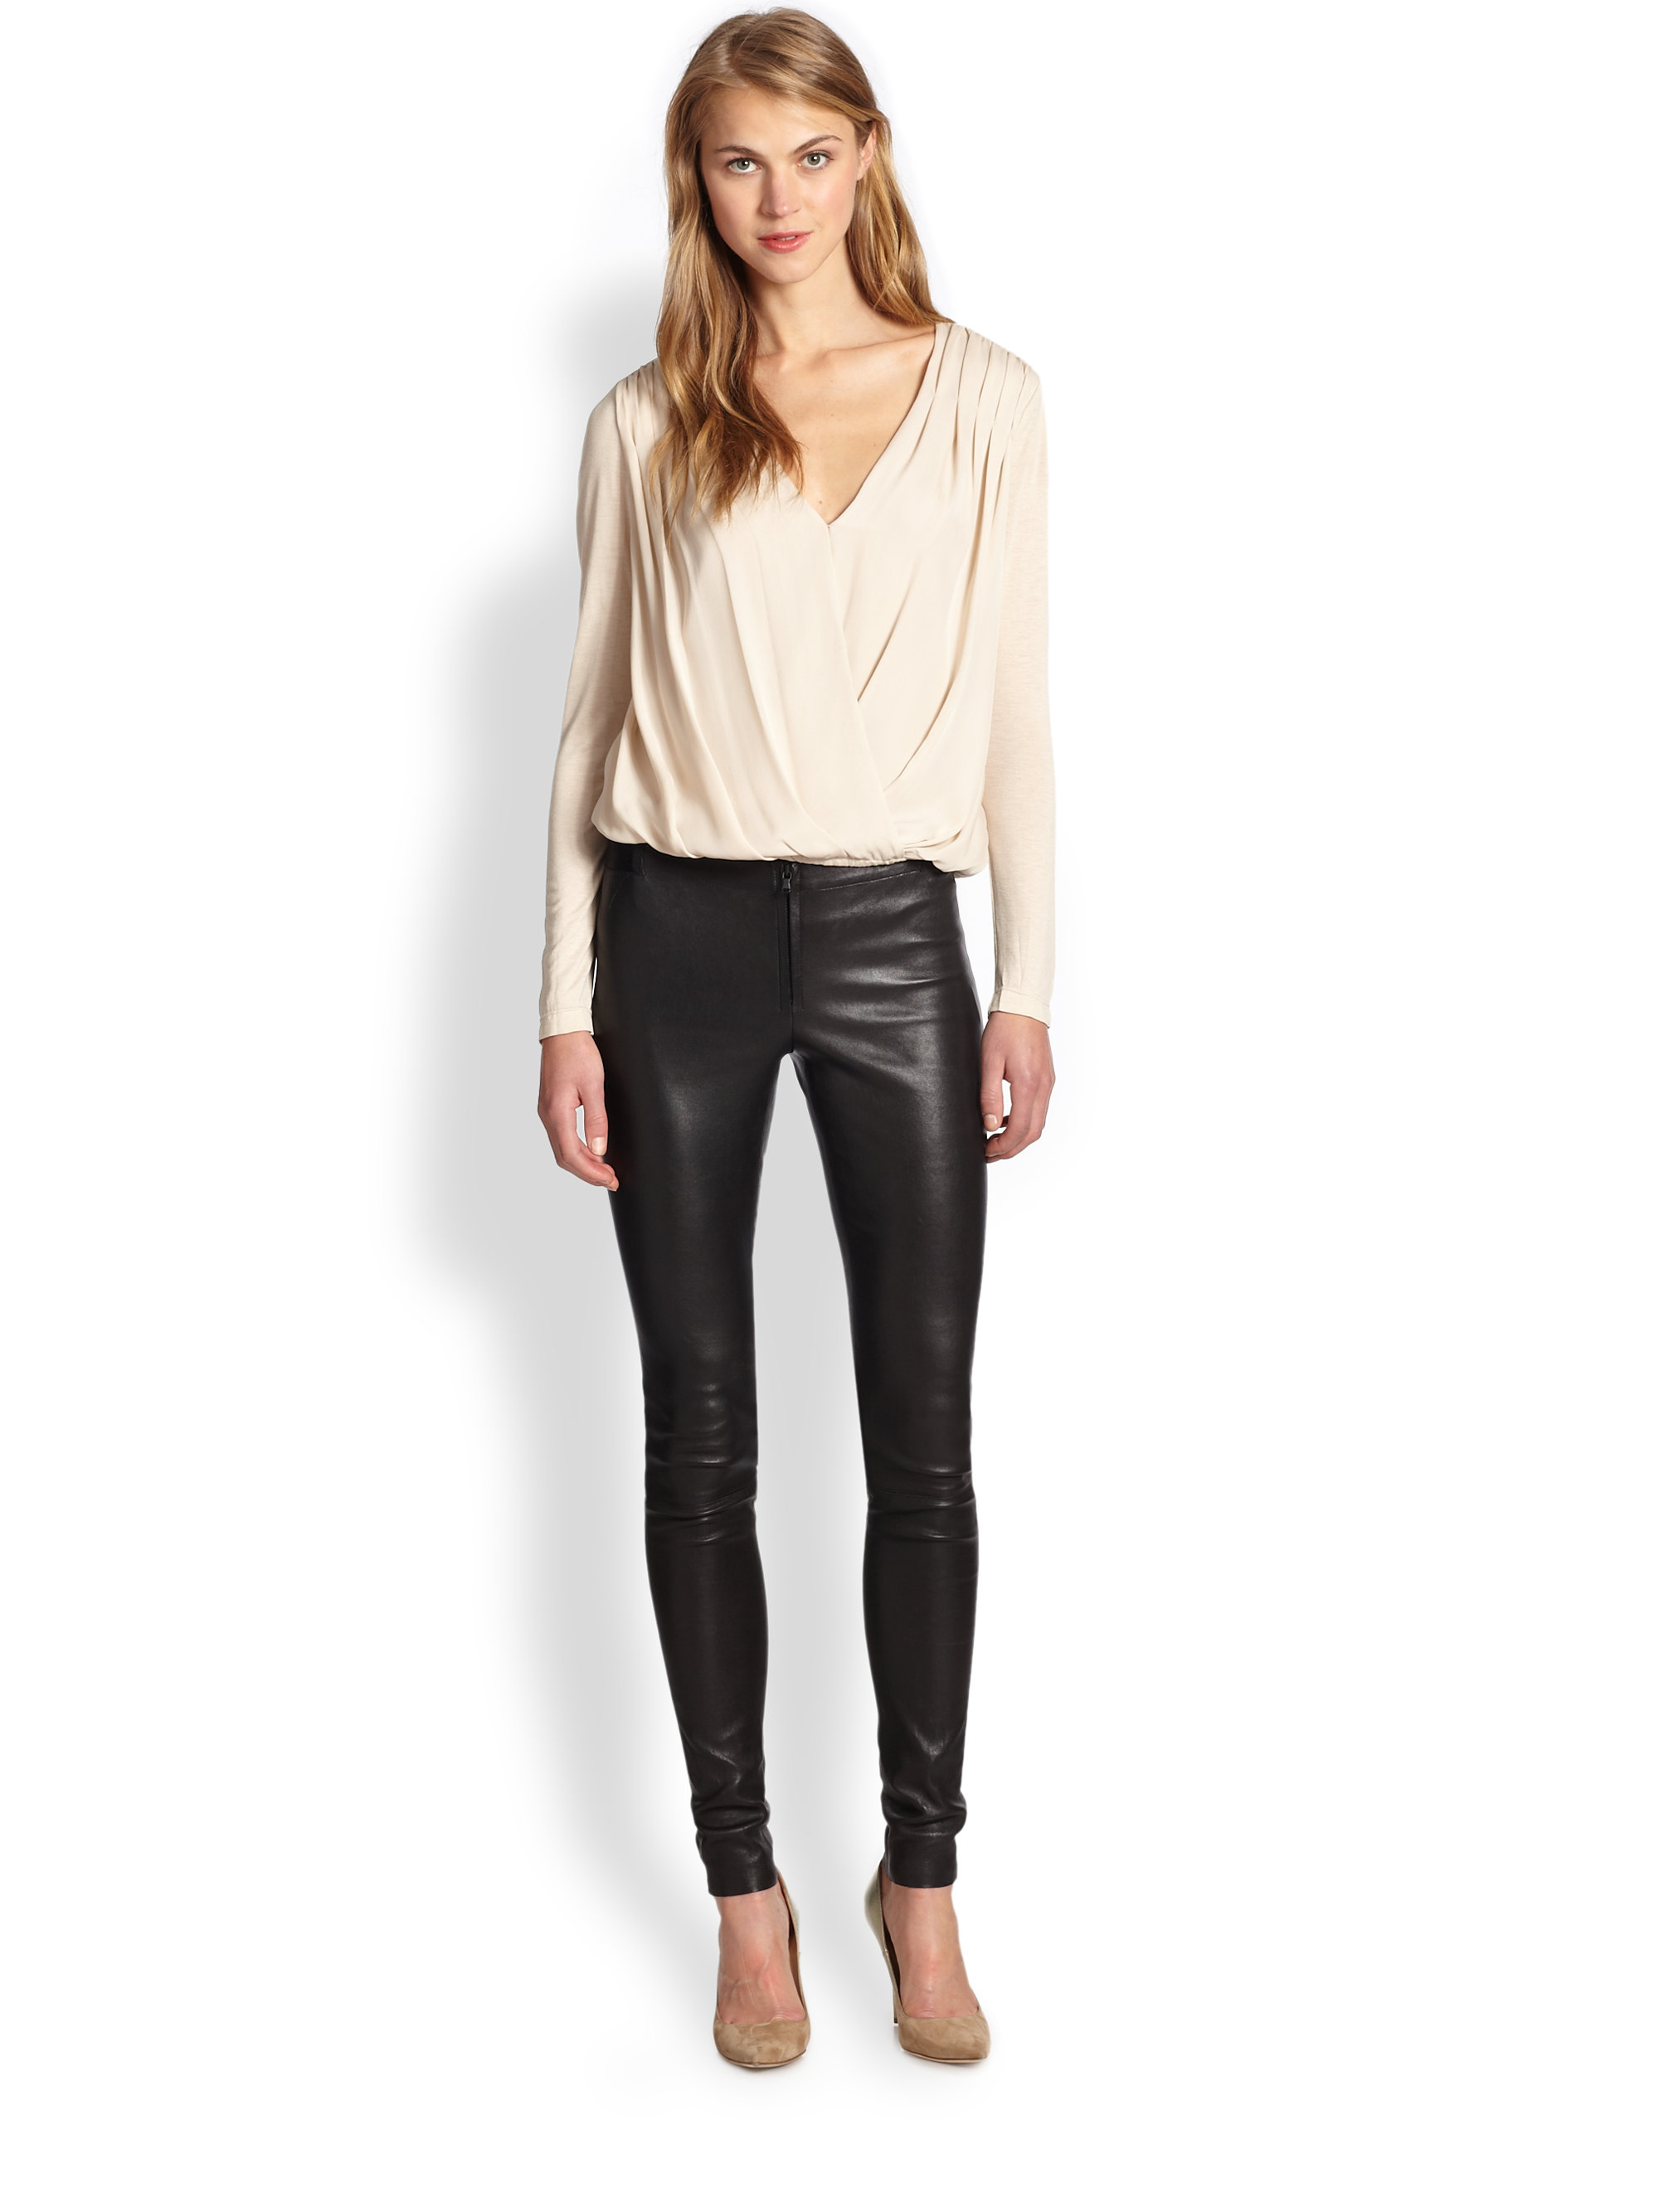 Alice + Olivia Cross Front Gathered Hem Top in Nude (Natural) - Lyst